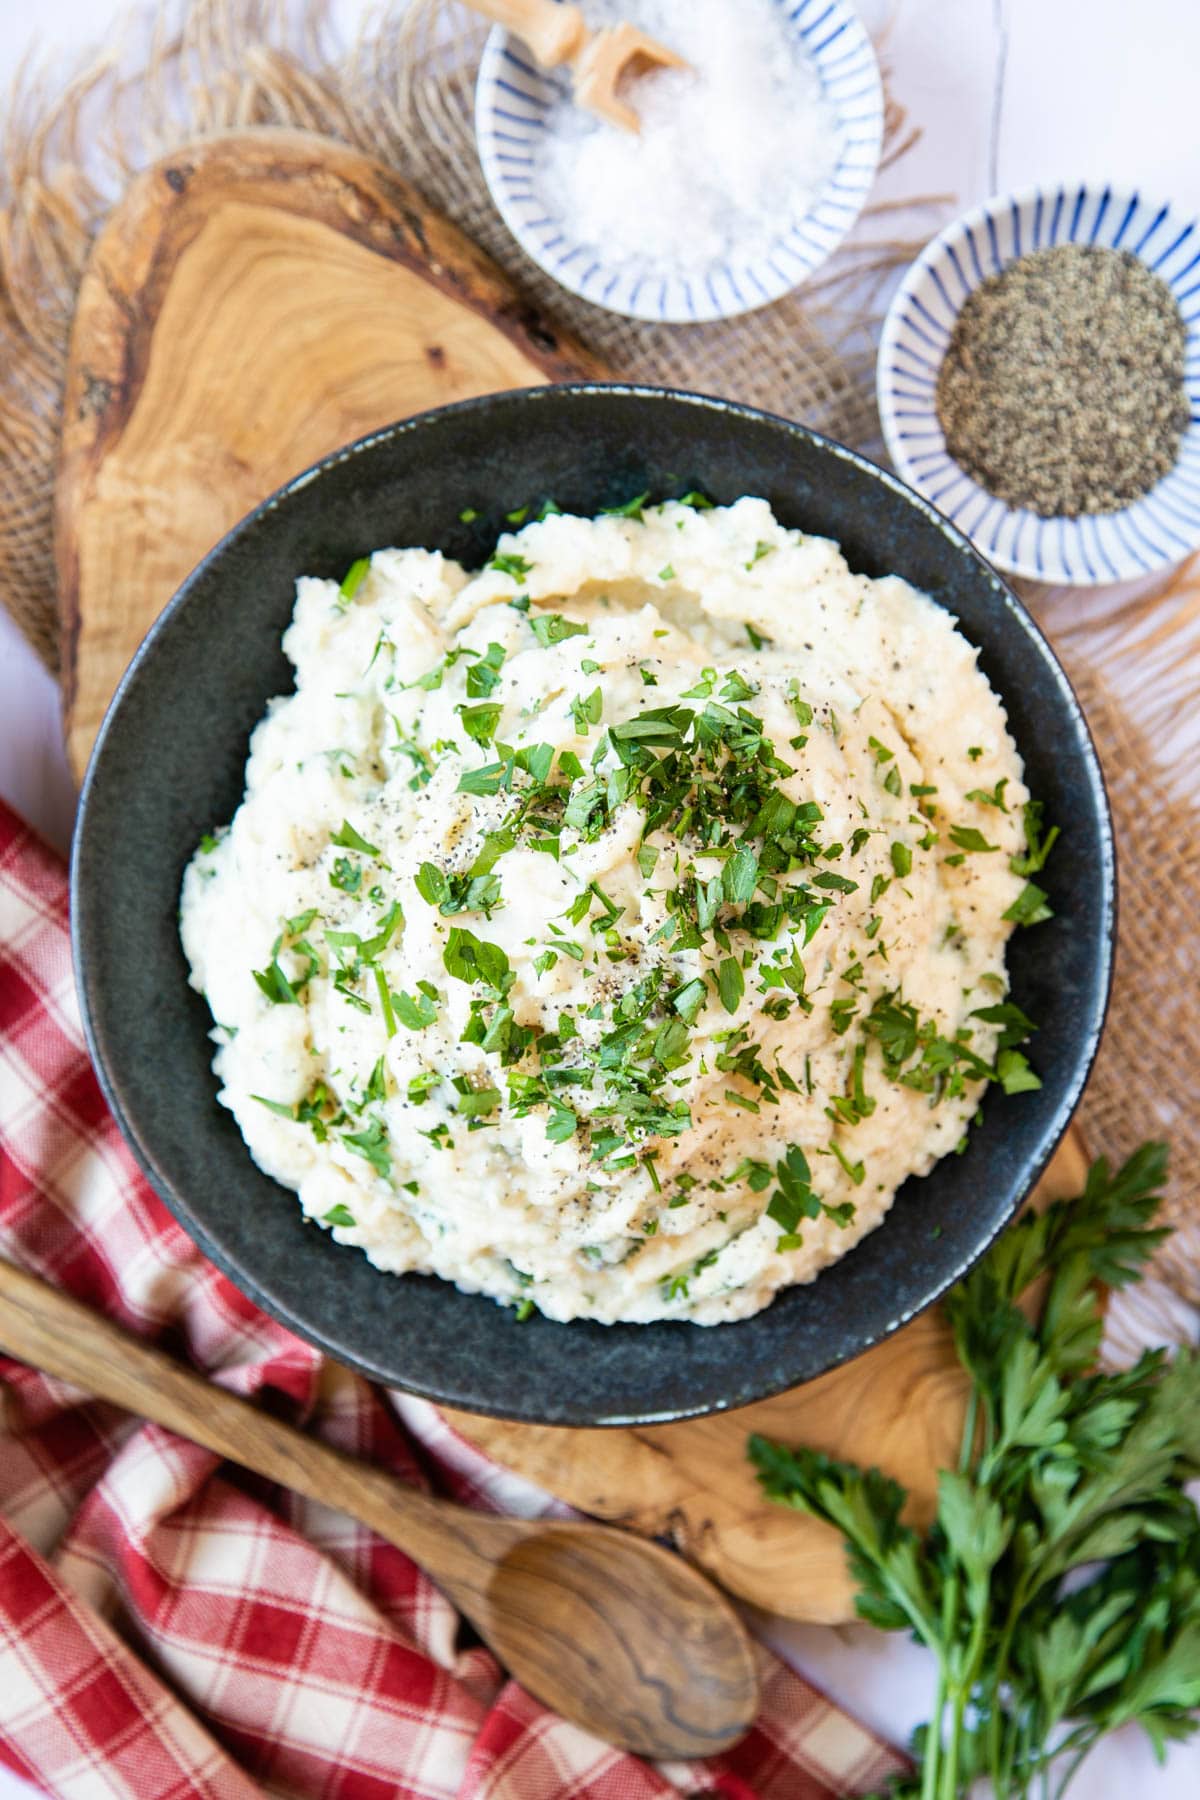 A garnish of parsley is the finishing touch to a dish of celeriac mash